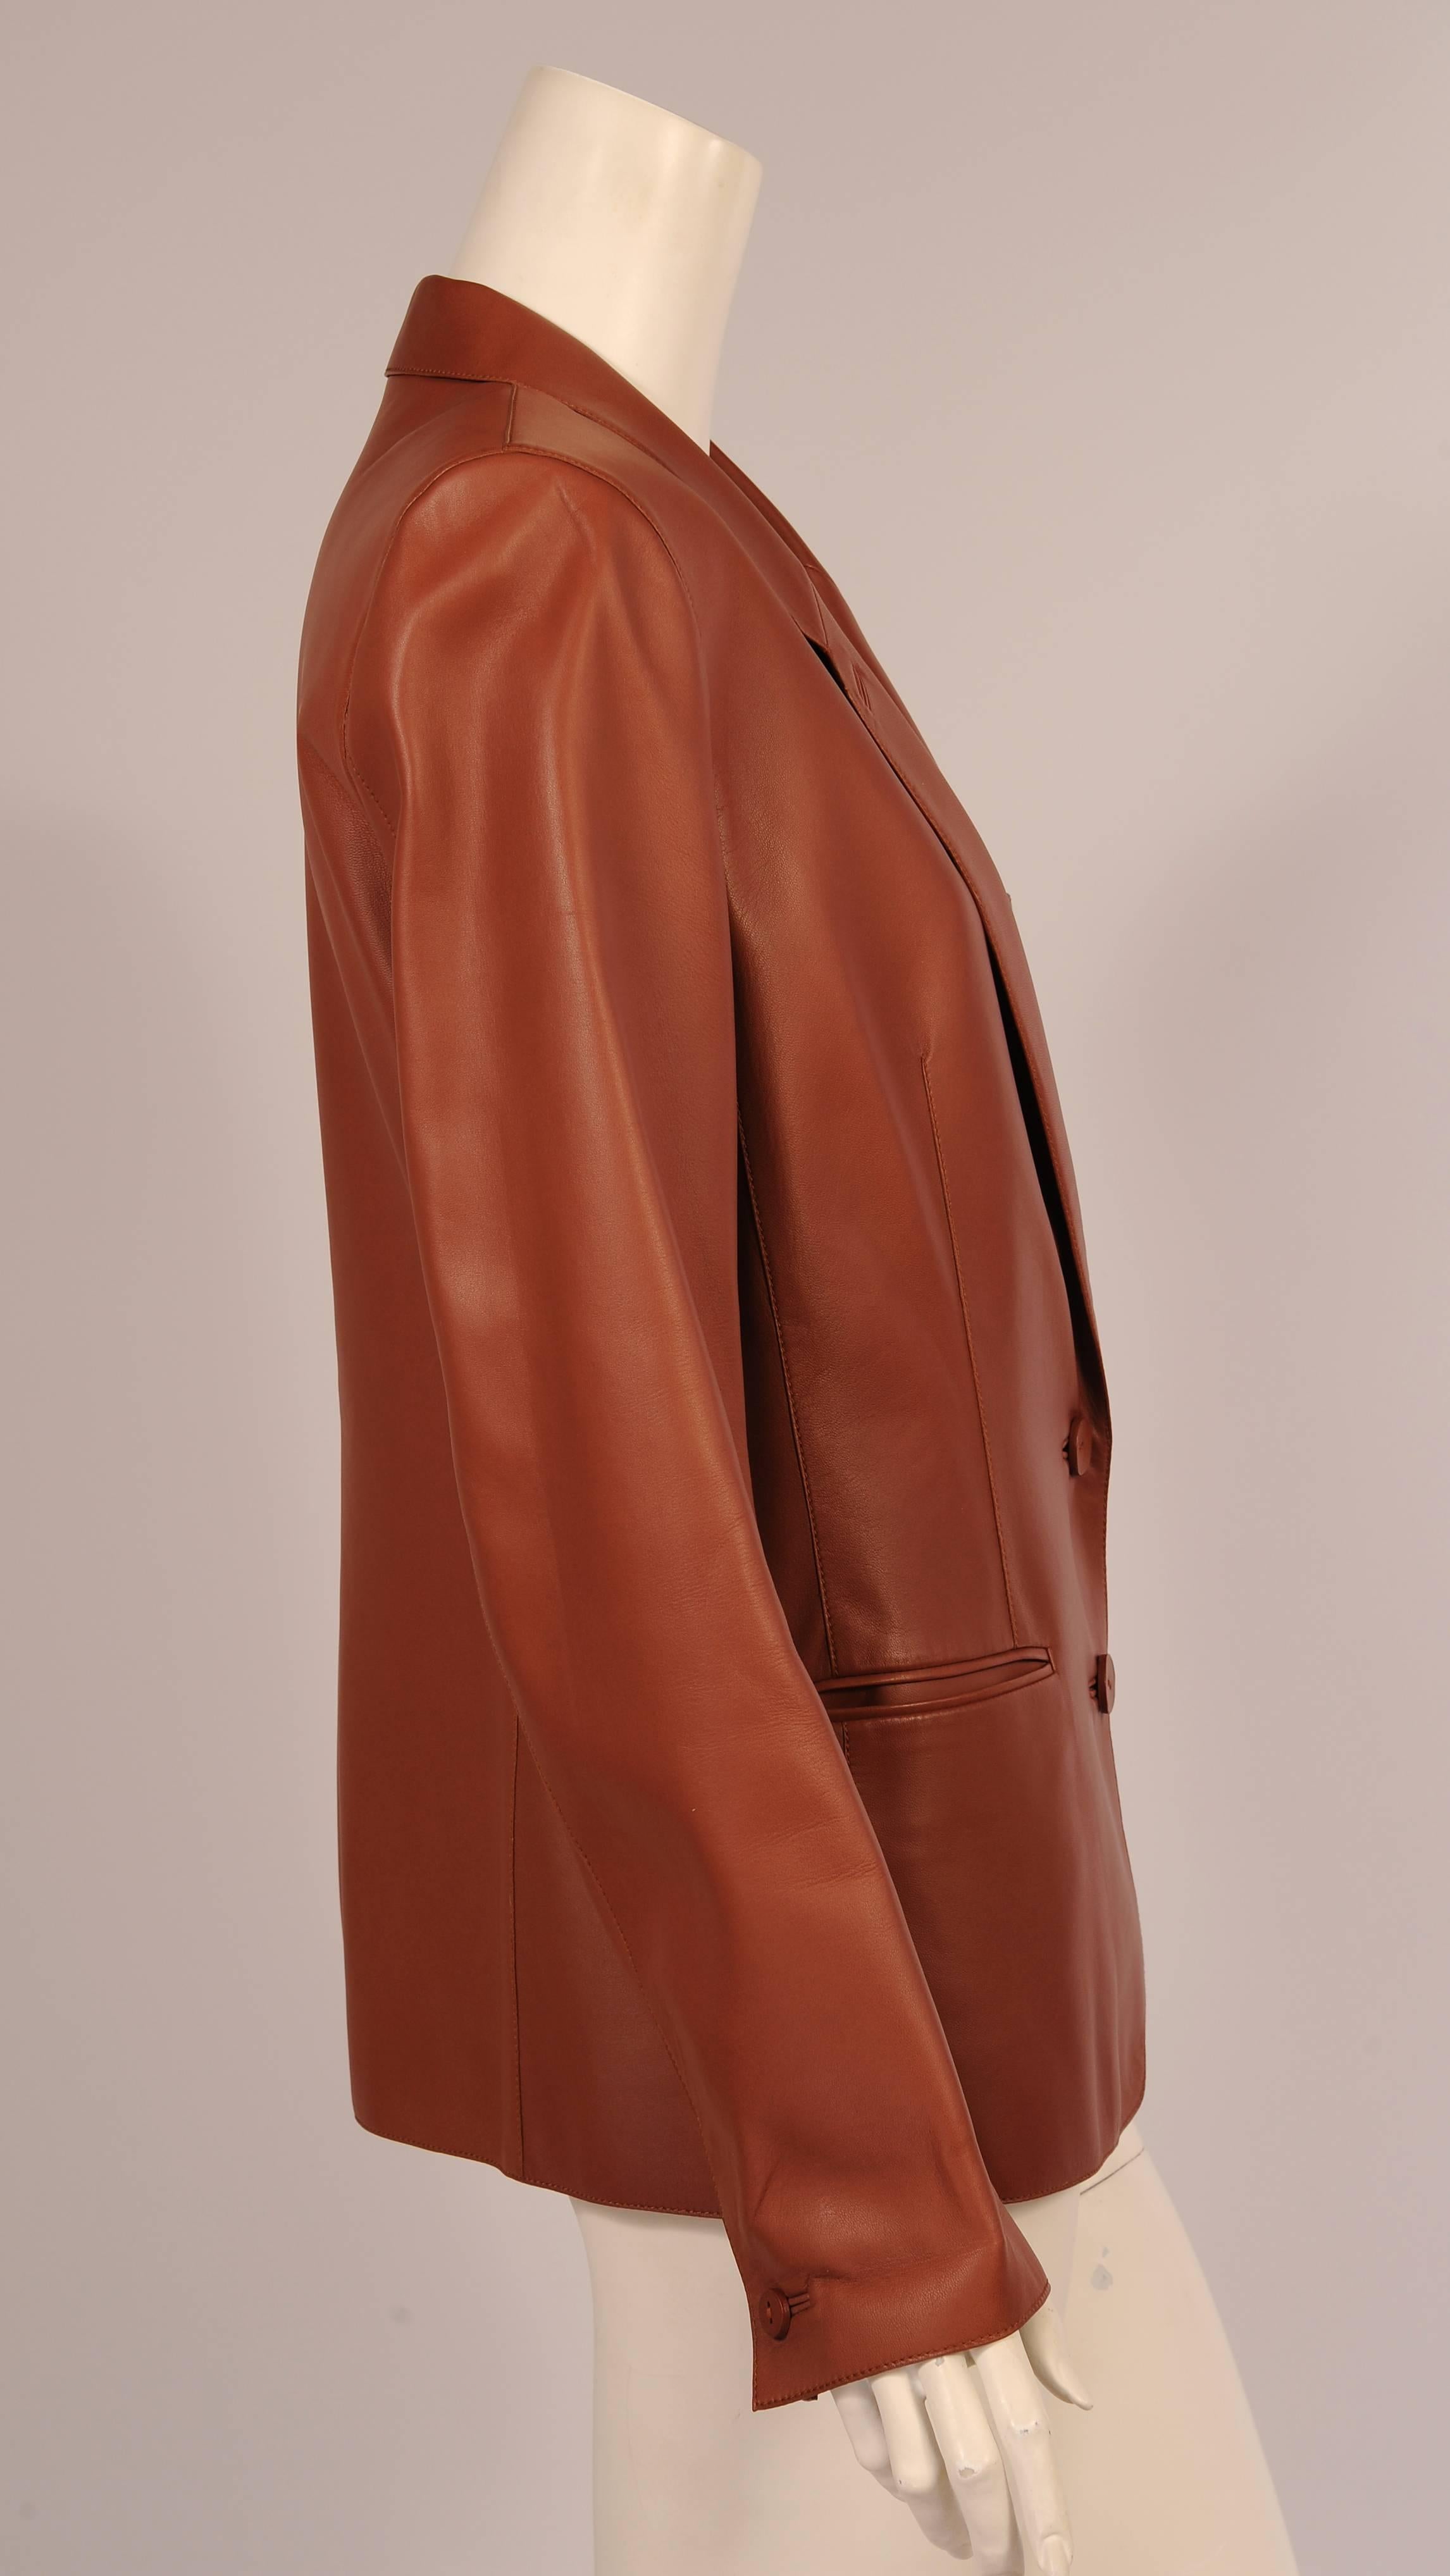 Martin Margiela used the softest caramel colored lambskin for this stylish two button blazer for Hermes. The buttons are leather backed by horn buttons on the inside of the center front and the cuffs. The jacket has a narrow notched lapel, one